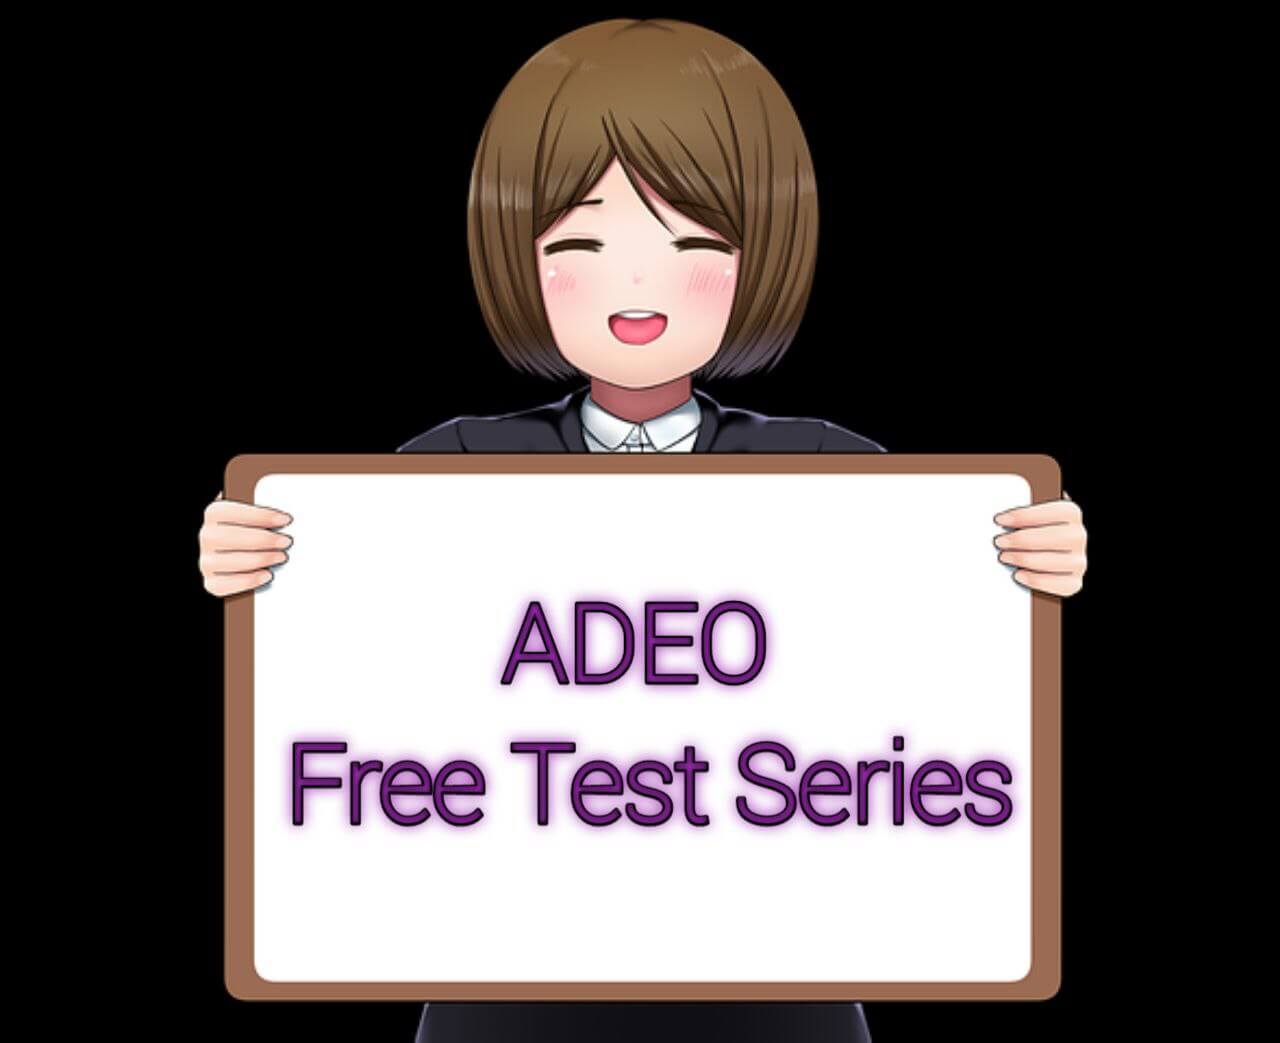 Adeo Online Free Test Series Free Test Series For Cgvyapam adeo